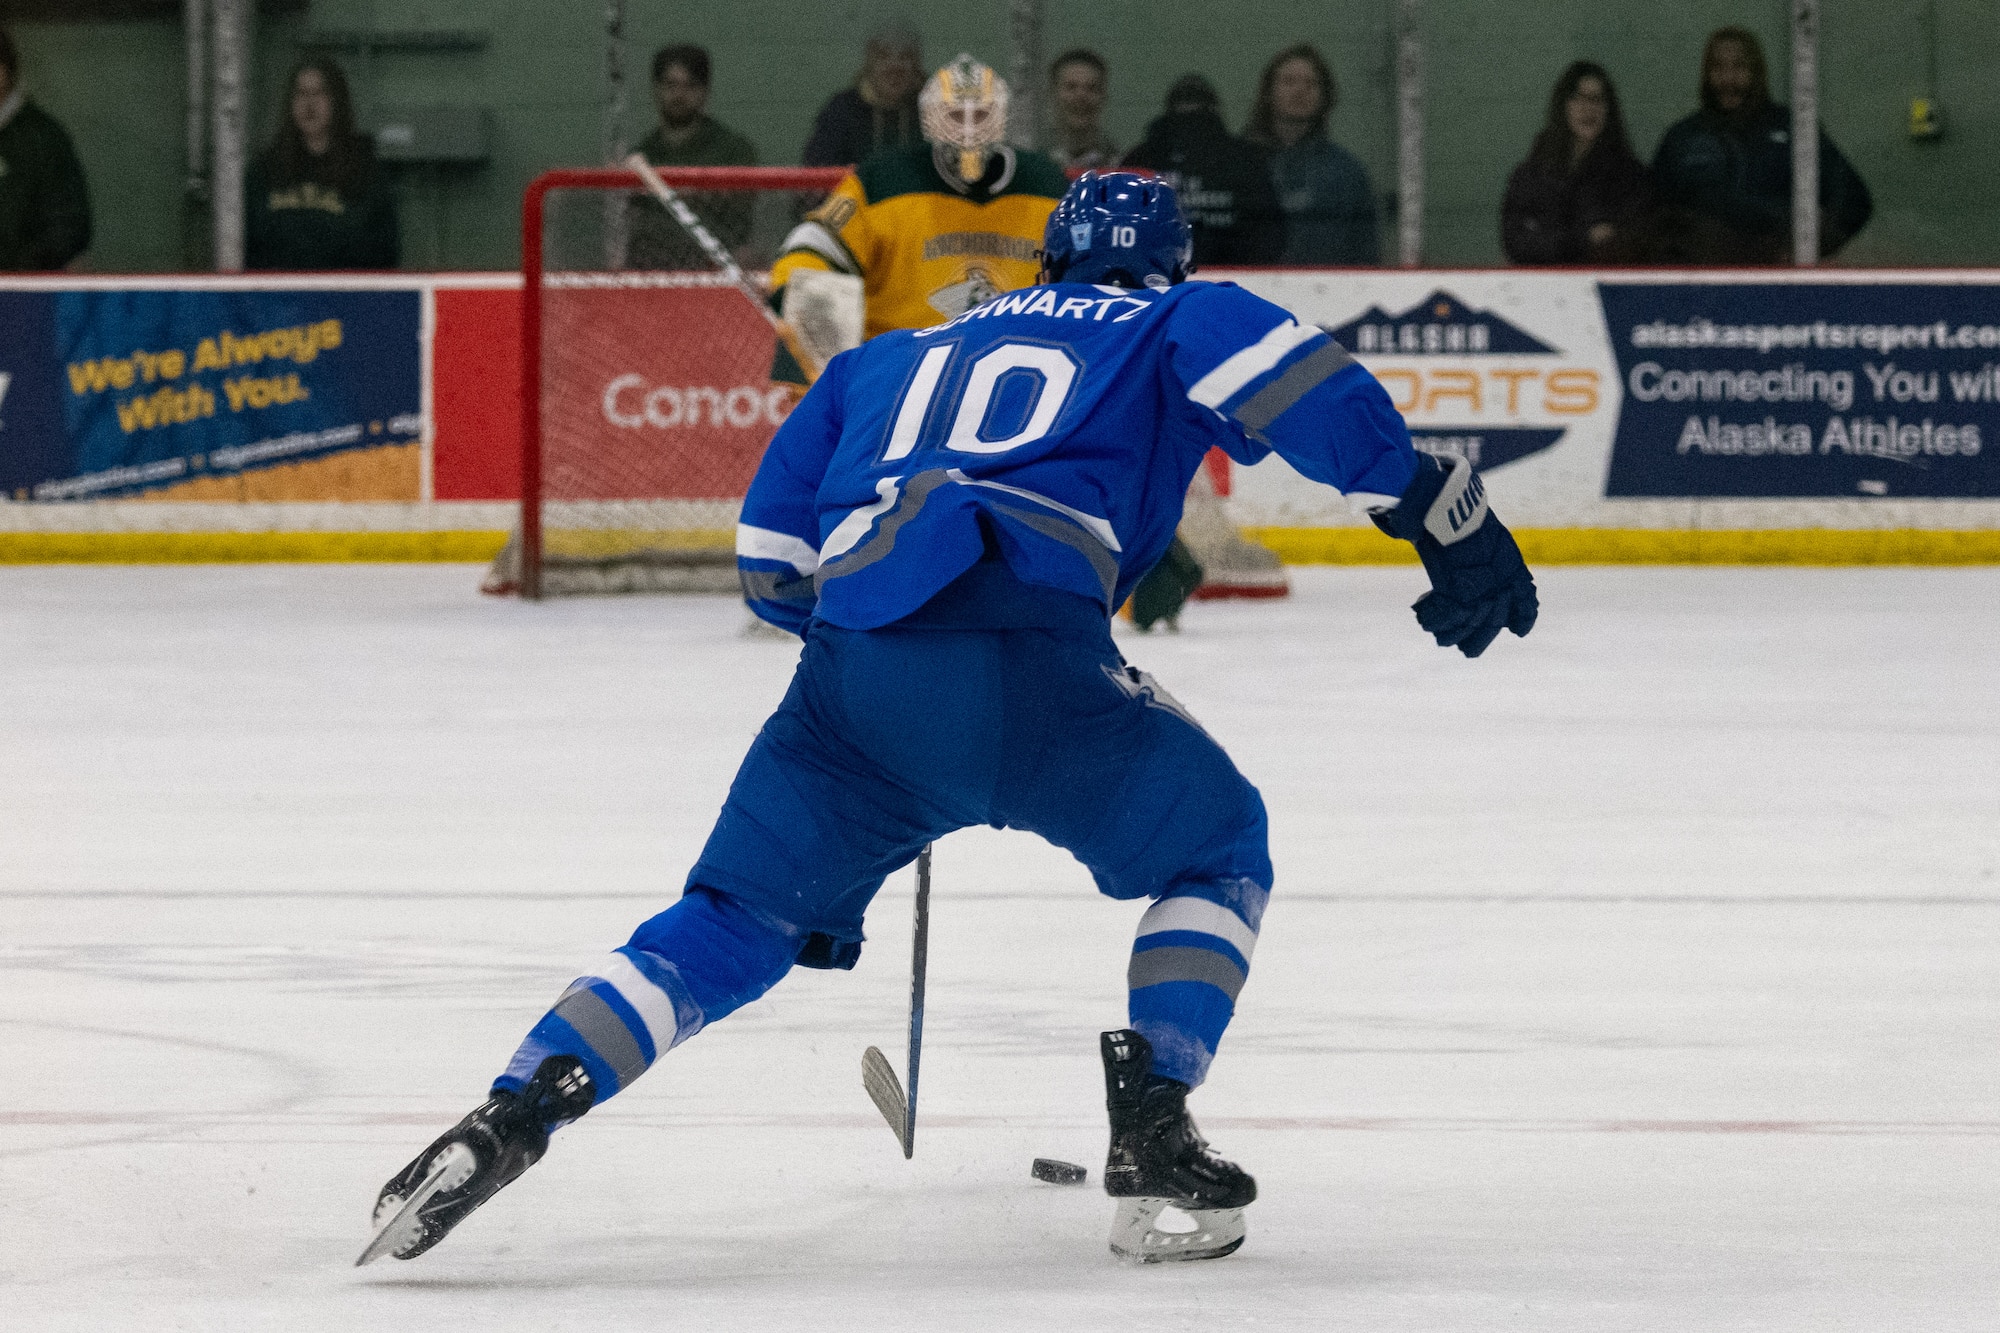 U.S. Air Force Academy hockey competes against University of Alaska Anchorage in Anchorage, Alaska.